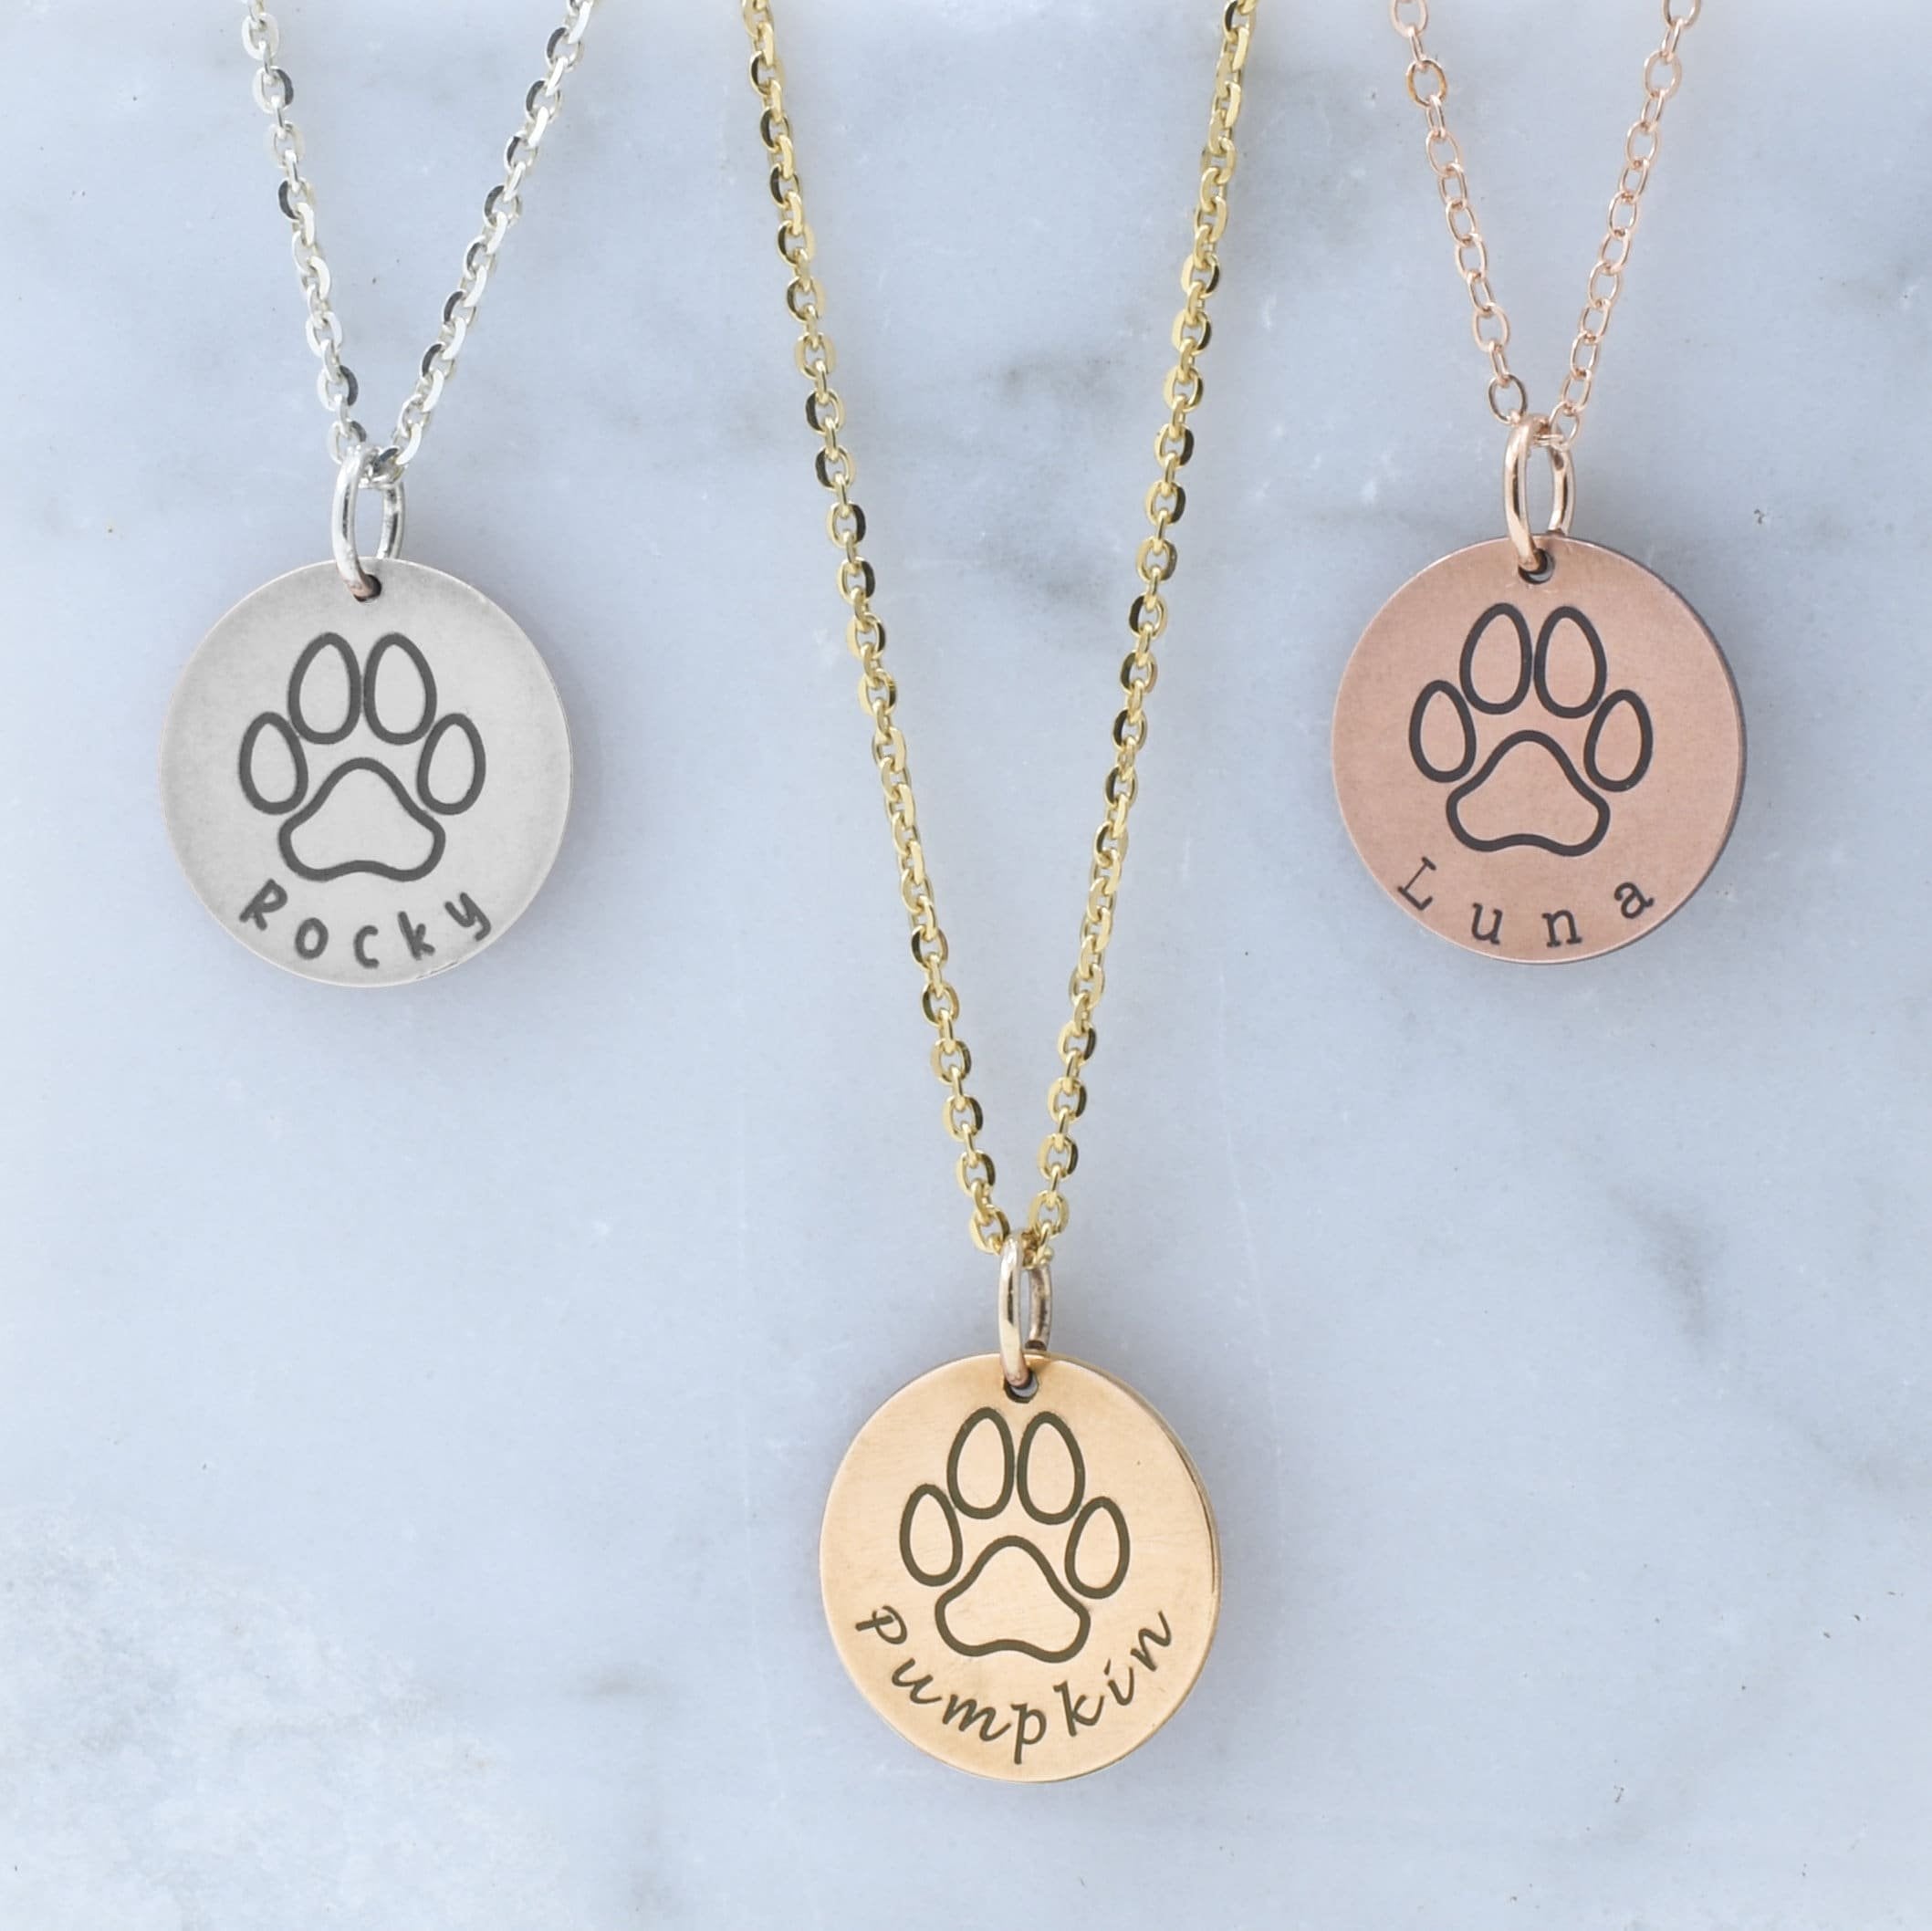 Dog Pawprint Necklace Pendant With Engraved Image, Pet Memorial Real Pawprint  Necklaces, Actual Dog Paw Print Pendant With Custom Pet Image - Etsy